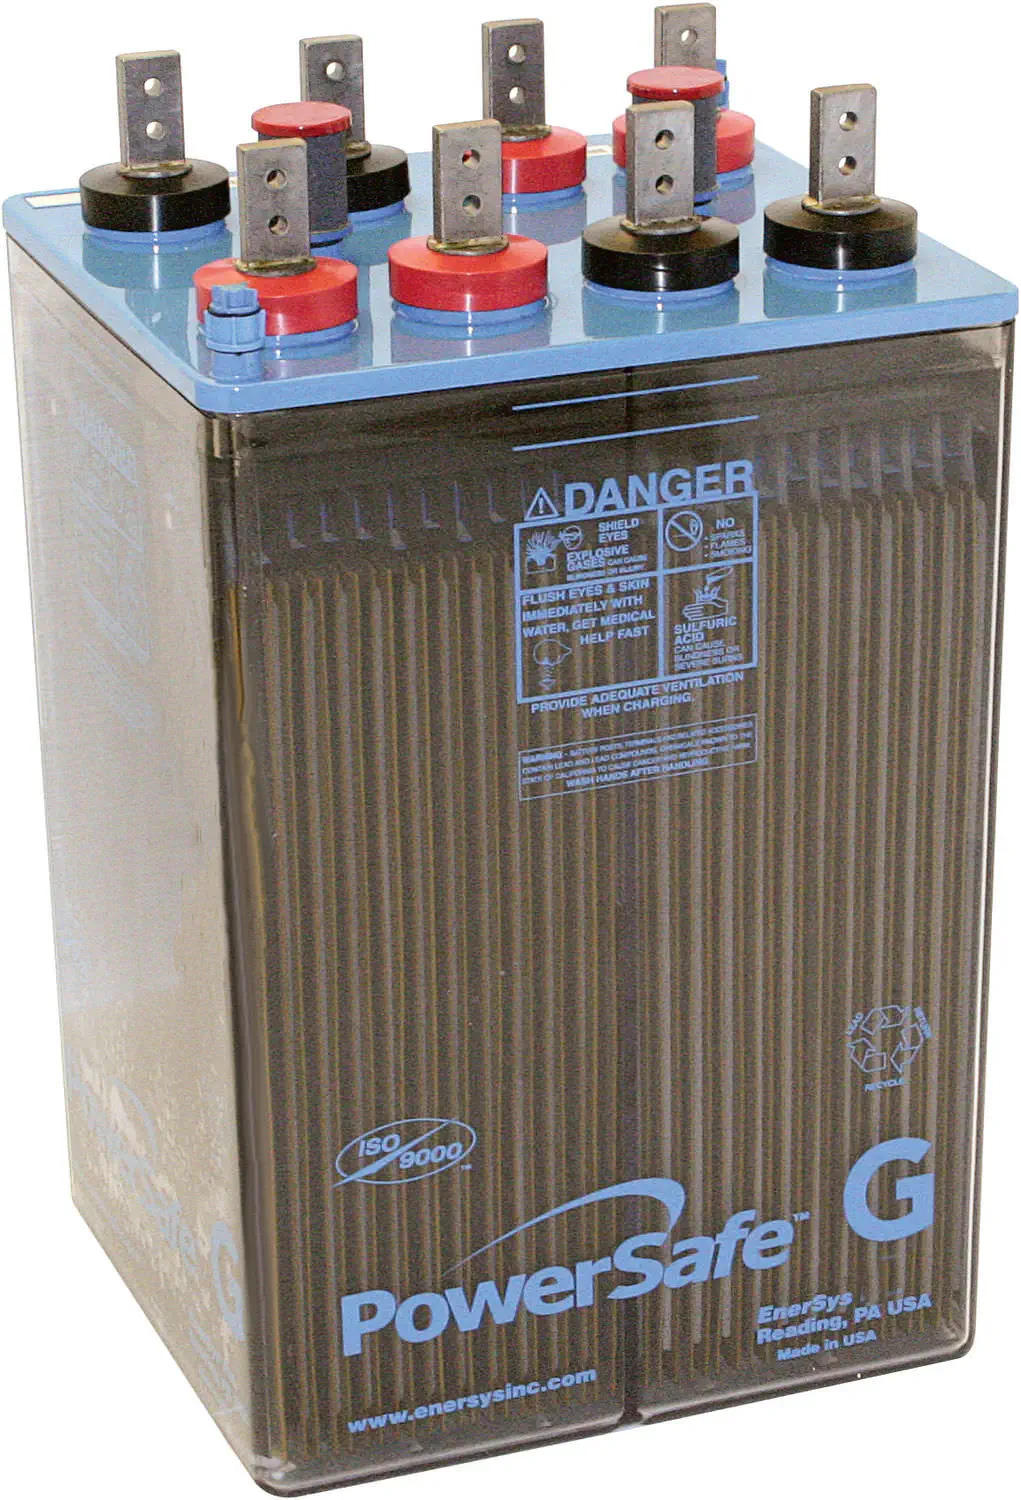 EnerSys PowerSafe 2GN-23